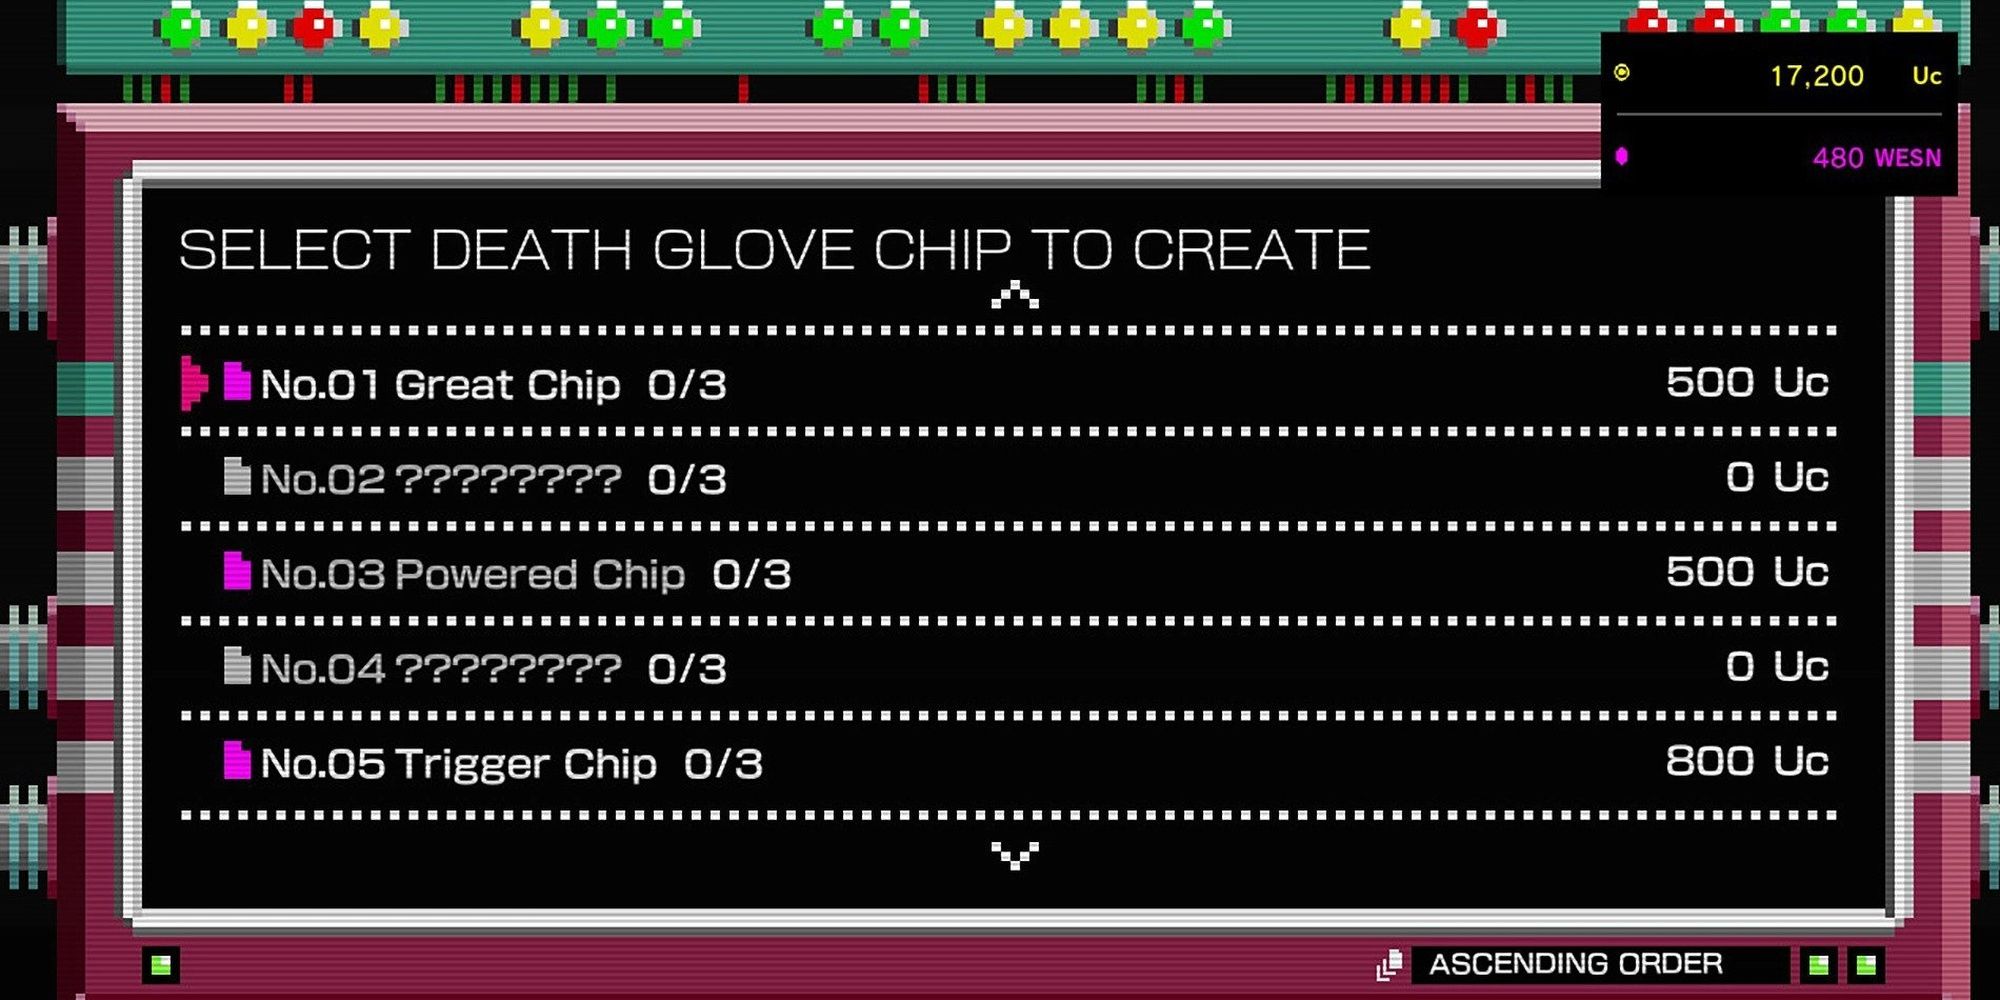 no more heroes 3 death glove supercomputer is used for crafting chips